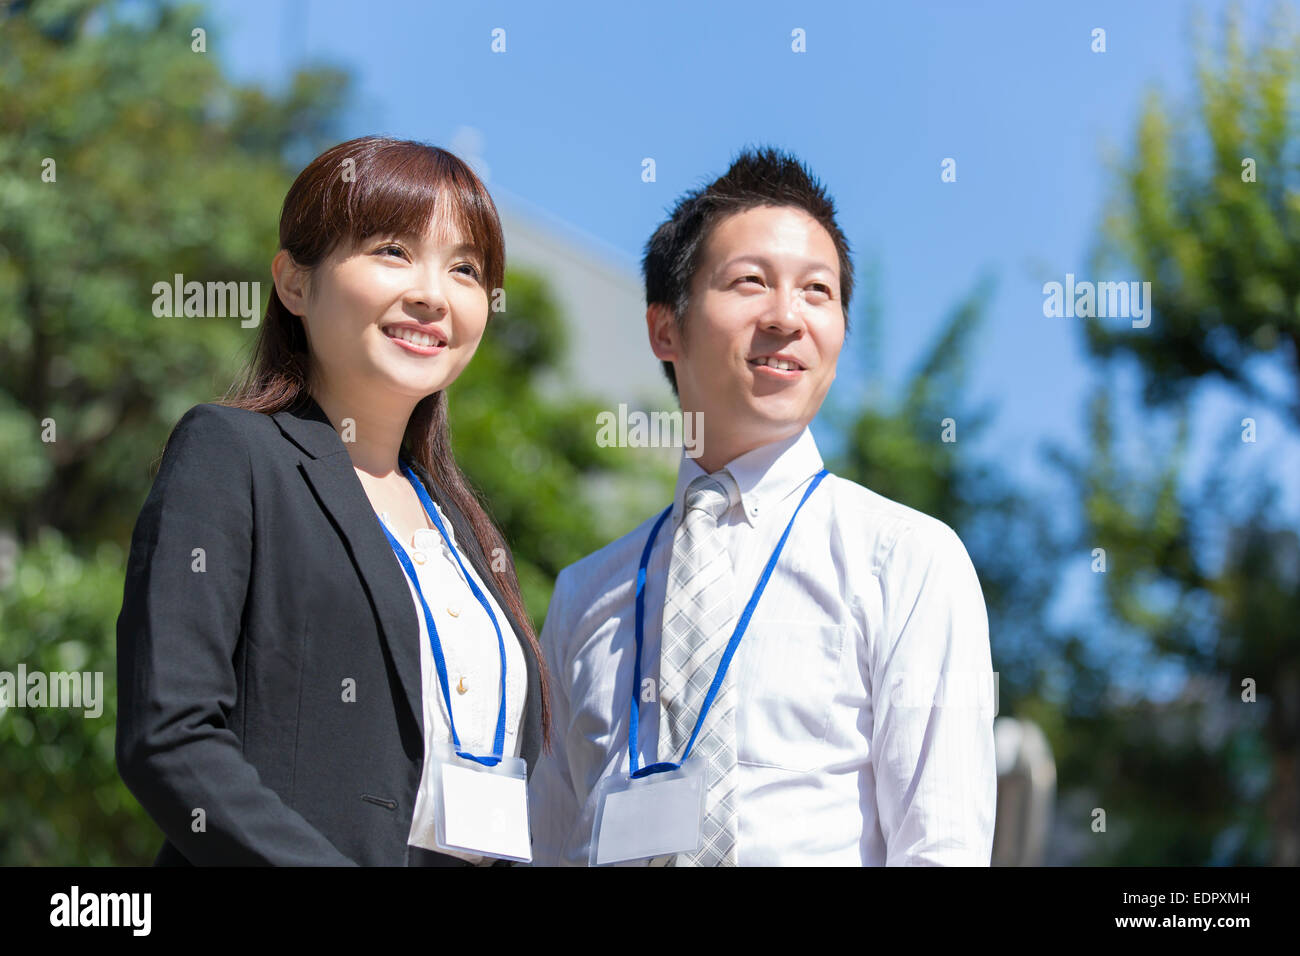 Business People Smiling and Looking into Distance Stock Photo